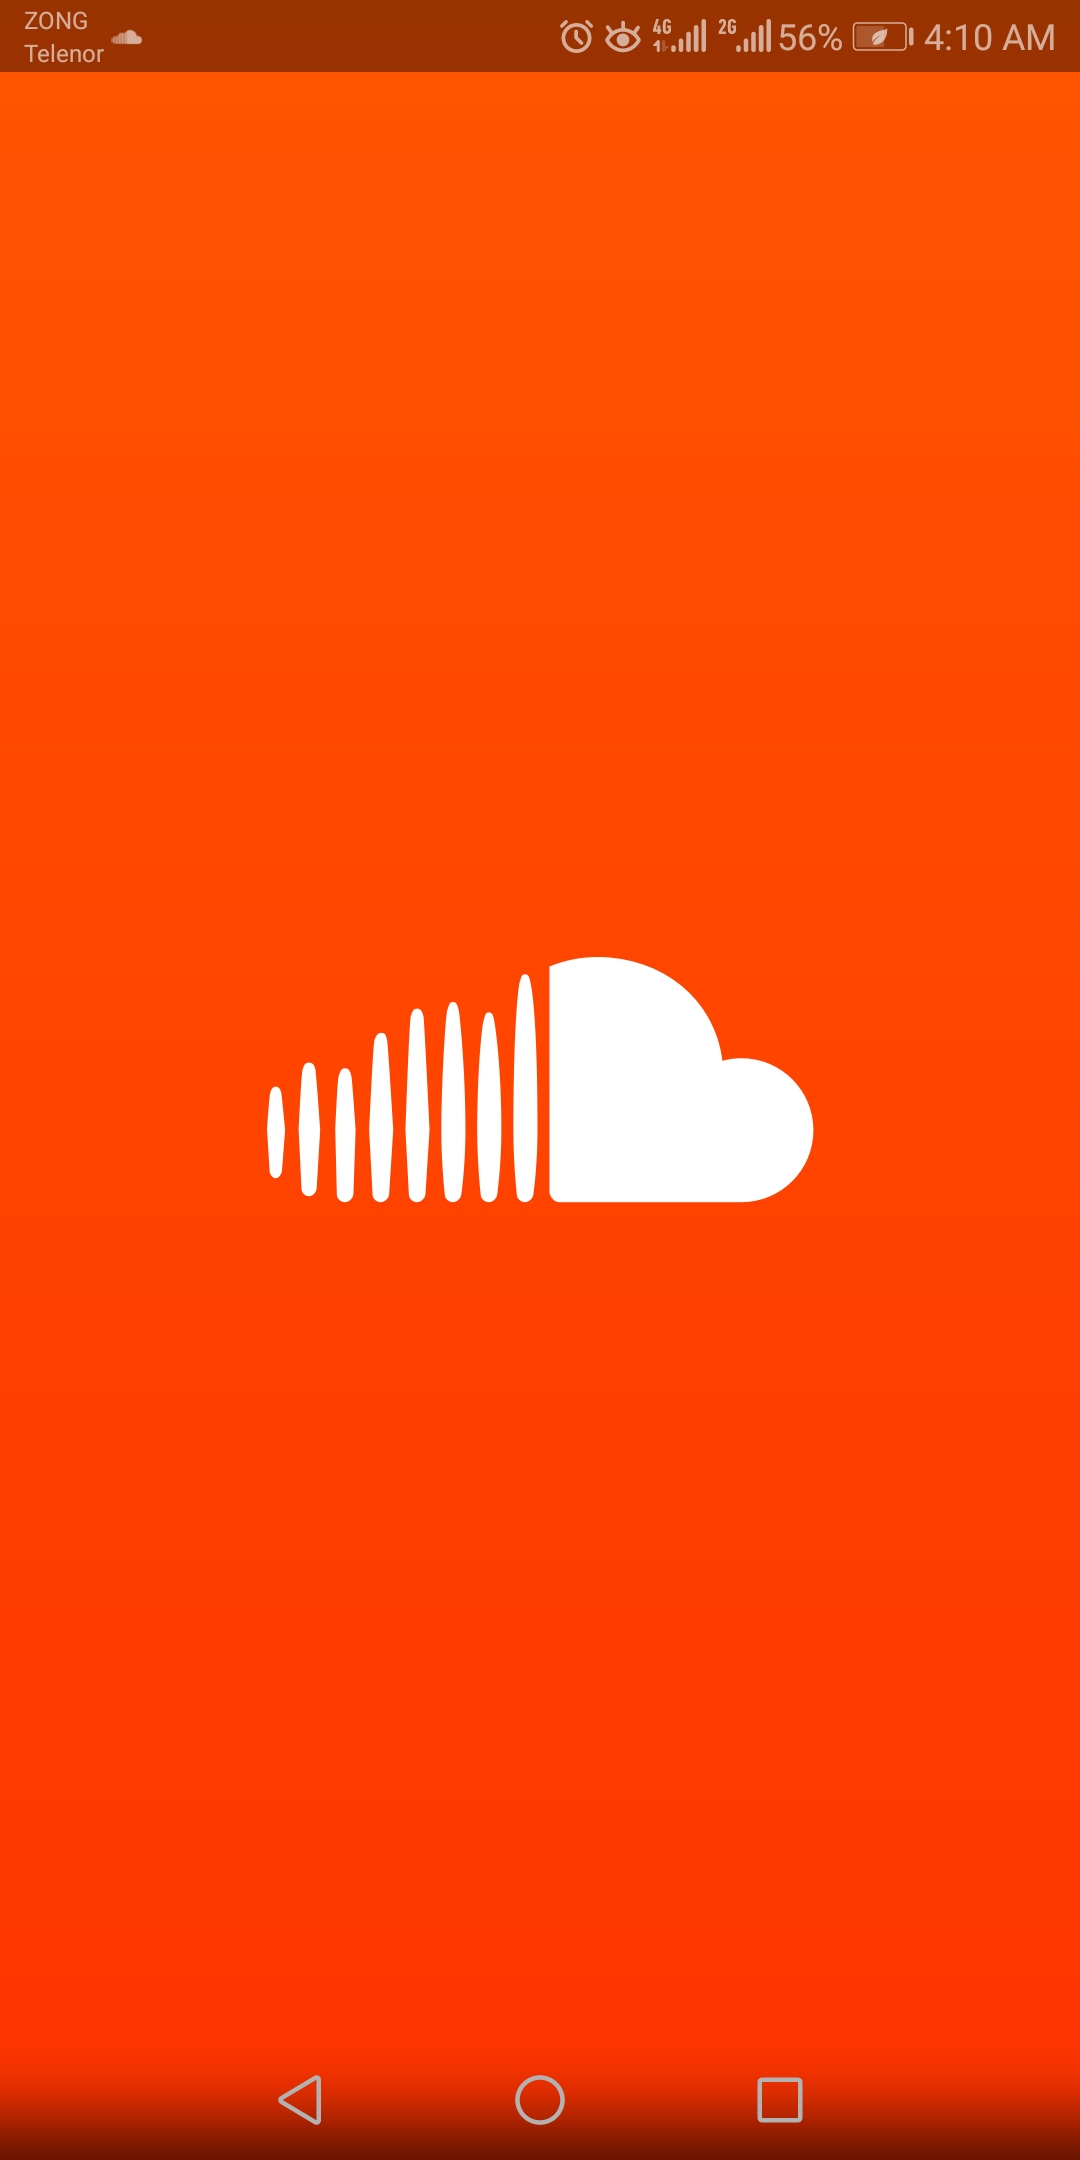 soundcloud downloader with album cover